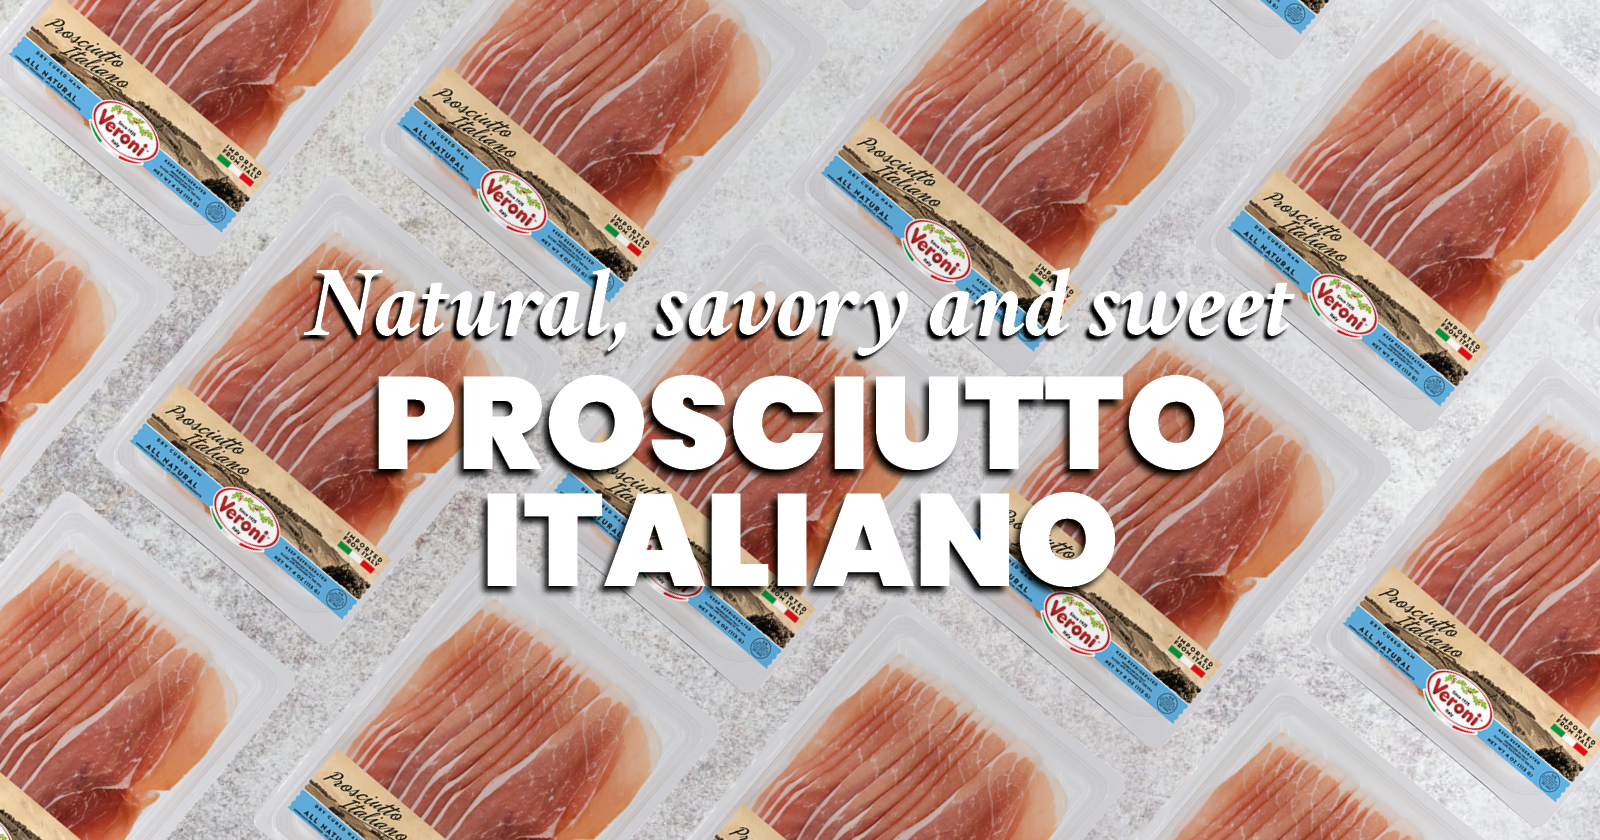 Discover the best way to taste Prosciutto Italiano and its history